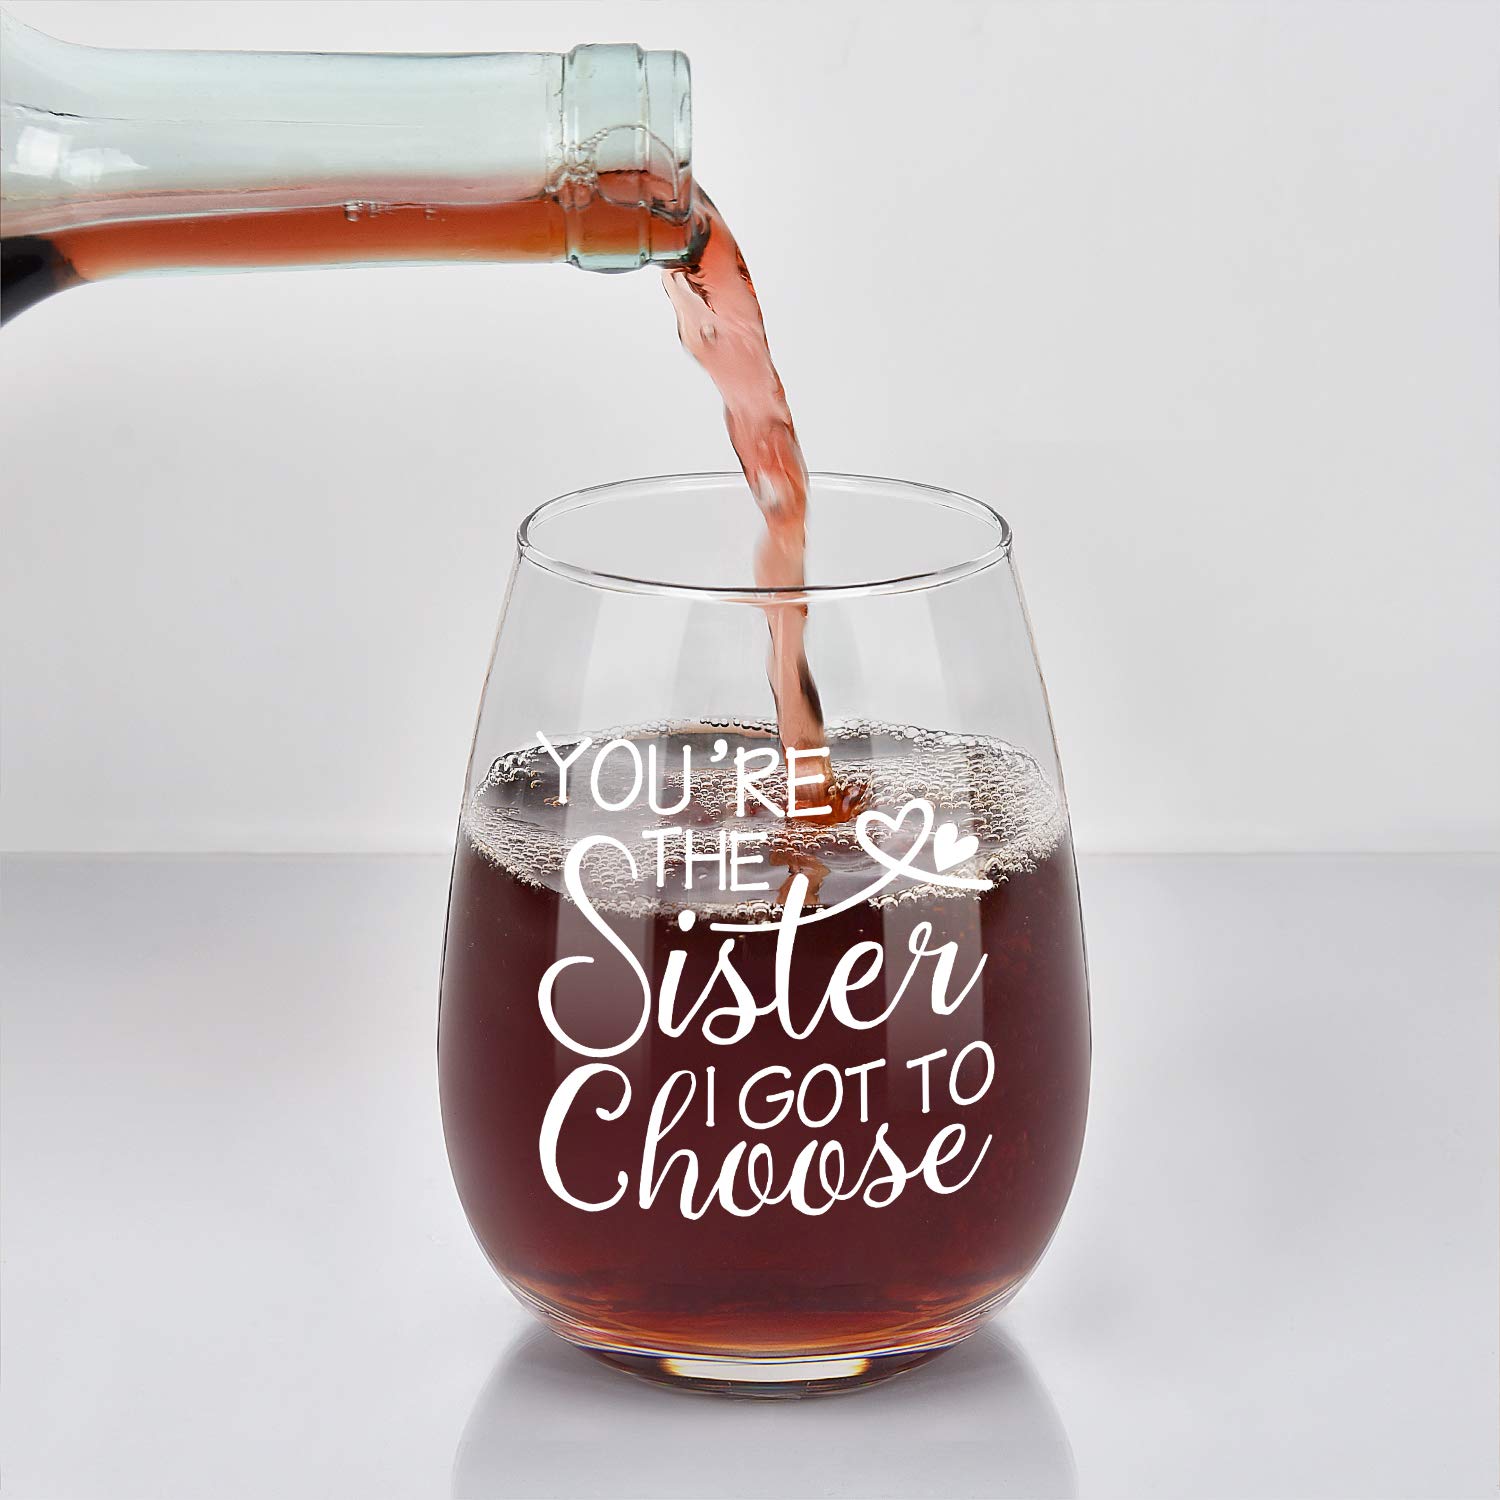 Modwnfy Sister Gift - You’re The Sister I Got To Choose Stemless Wine Glass 15 Oz, Sister Wine Glass for Women Girl Friend Soul Sister BFF, Gift Idea for Birthday Galentines Day Christmas